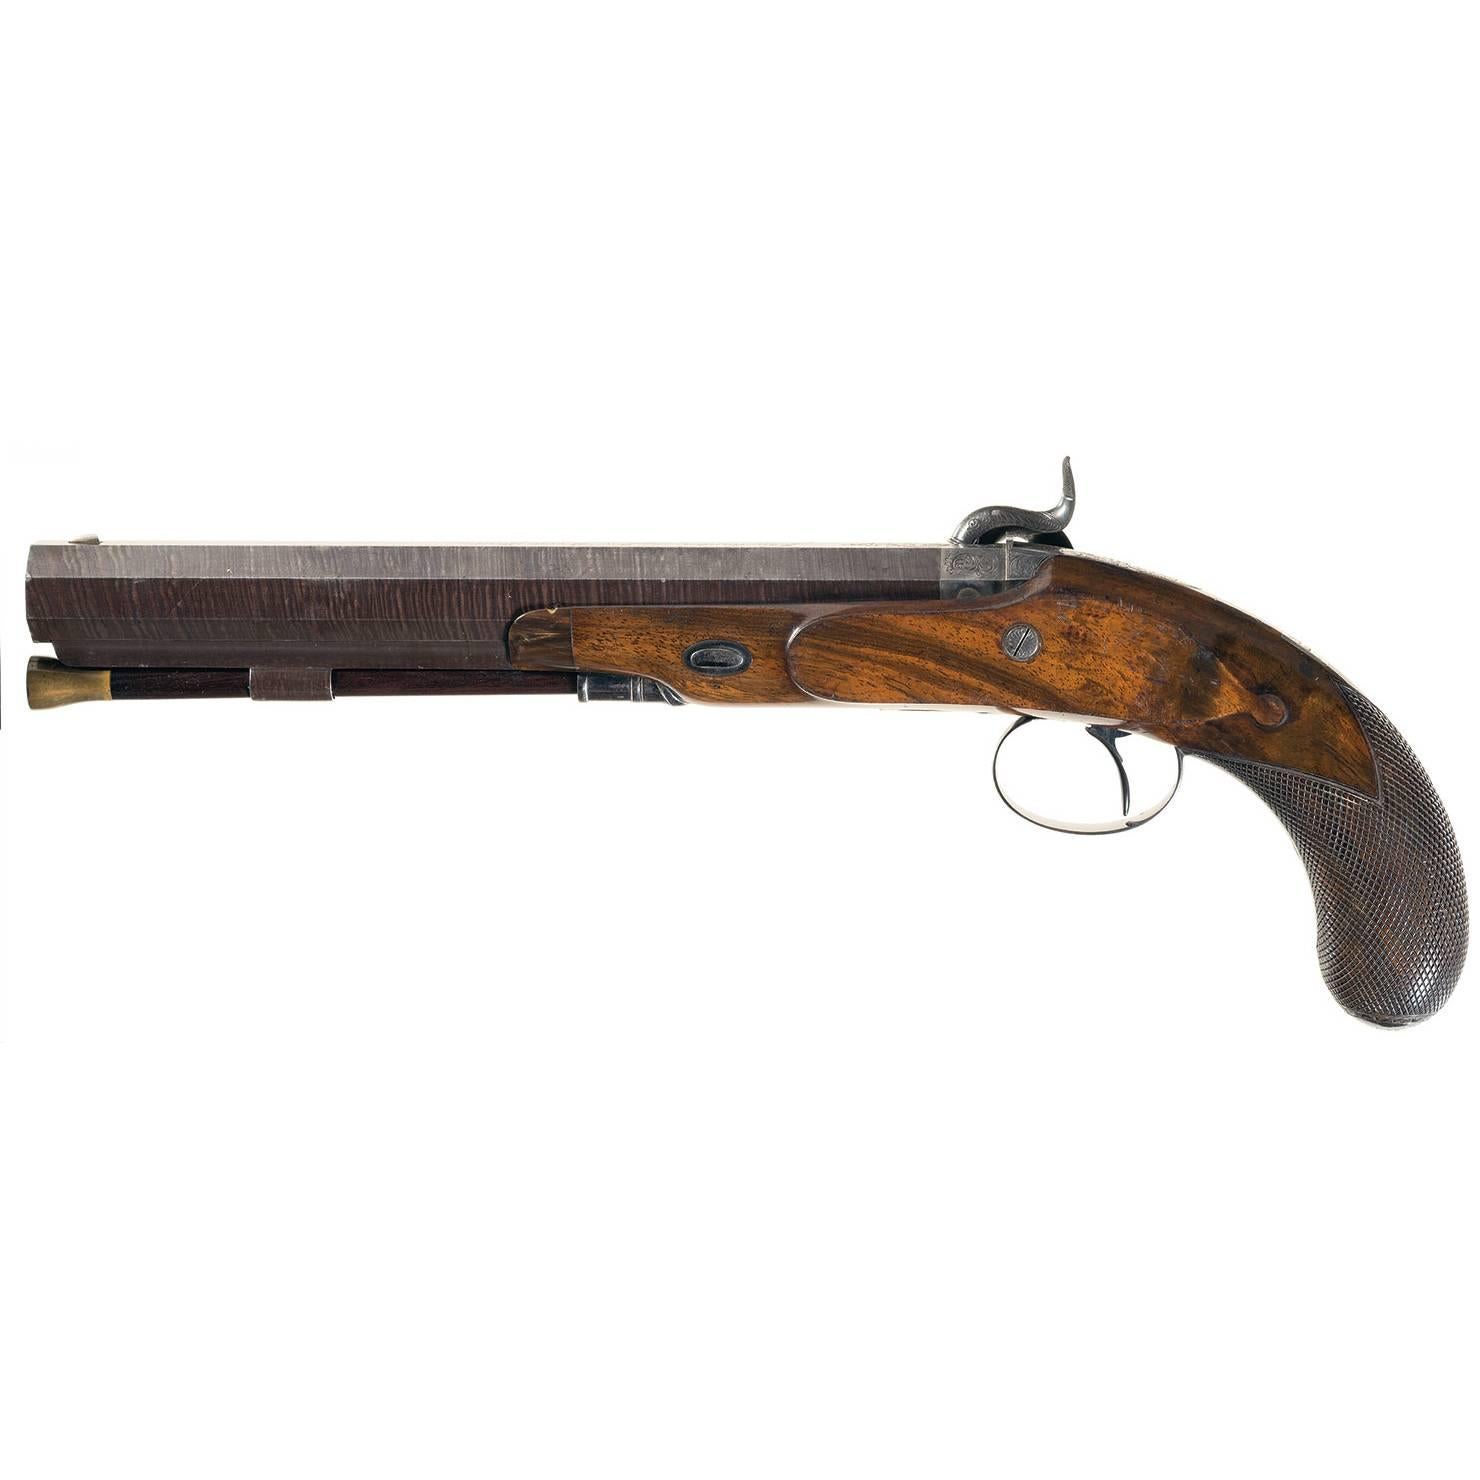 John Manton is regarded as one of the most innovative English gun makers of the late 18th and early 19th centuries. His inventive spirit and desire for continued improvement challenged the designs of the old masters. Manton's patents and new designs